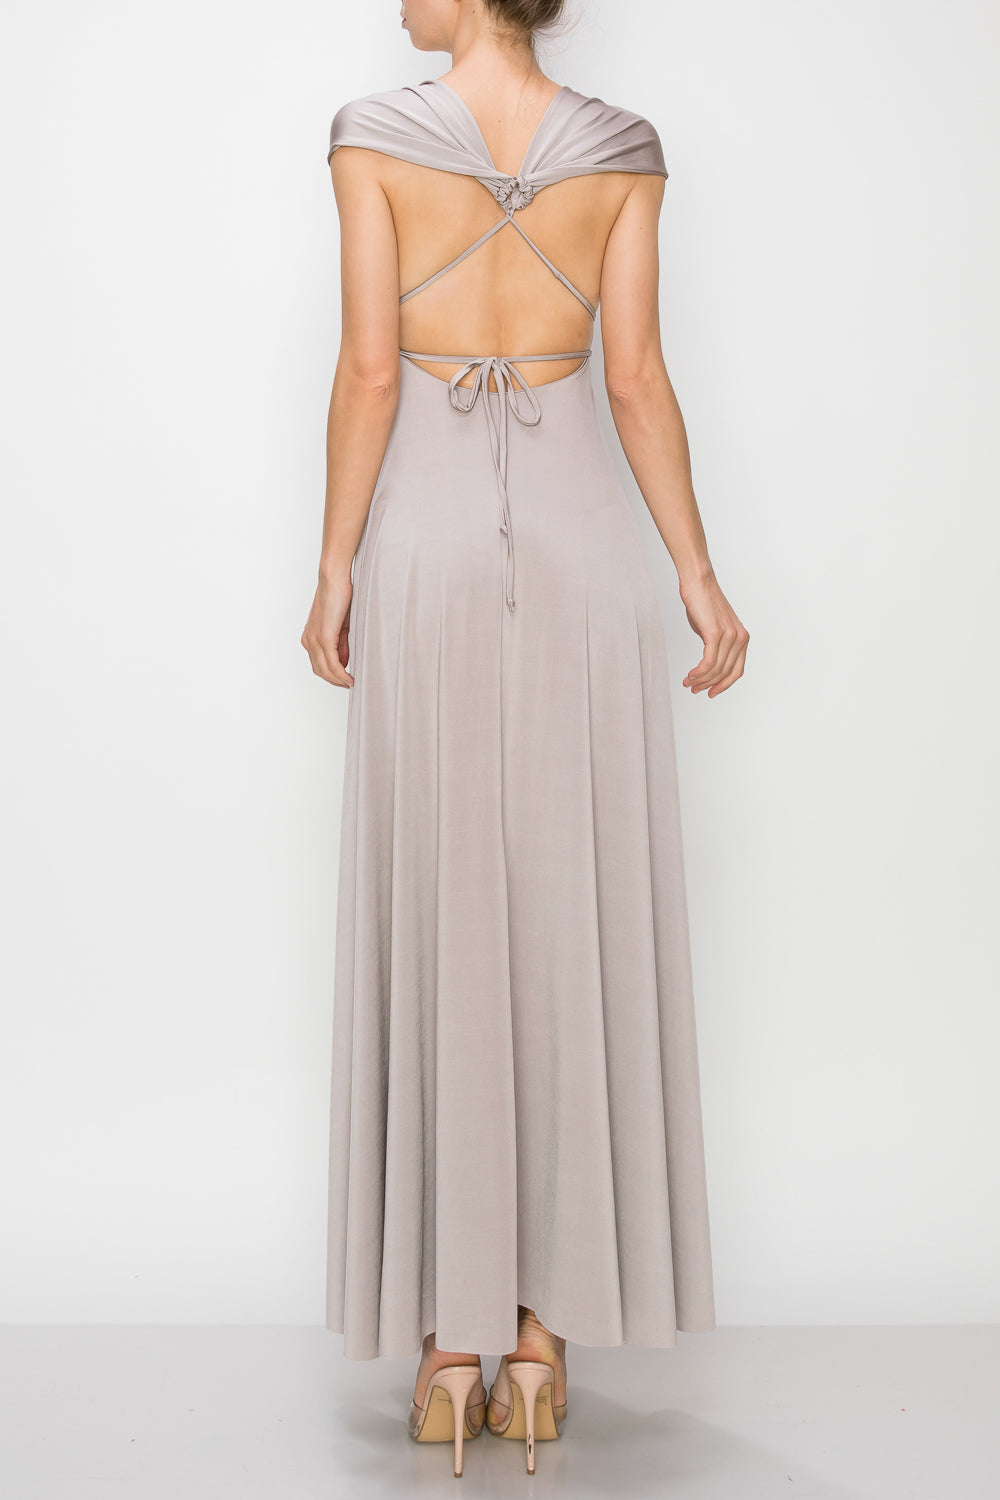 The Bliss Gown - Reversible